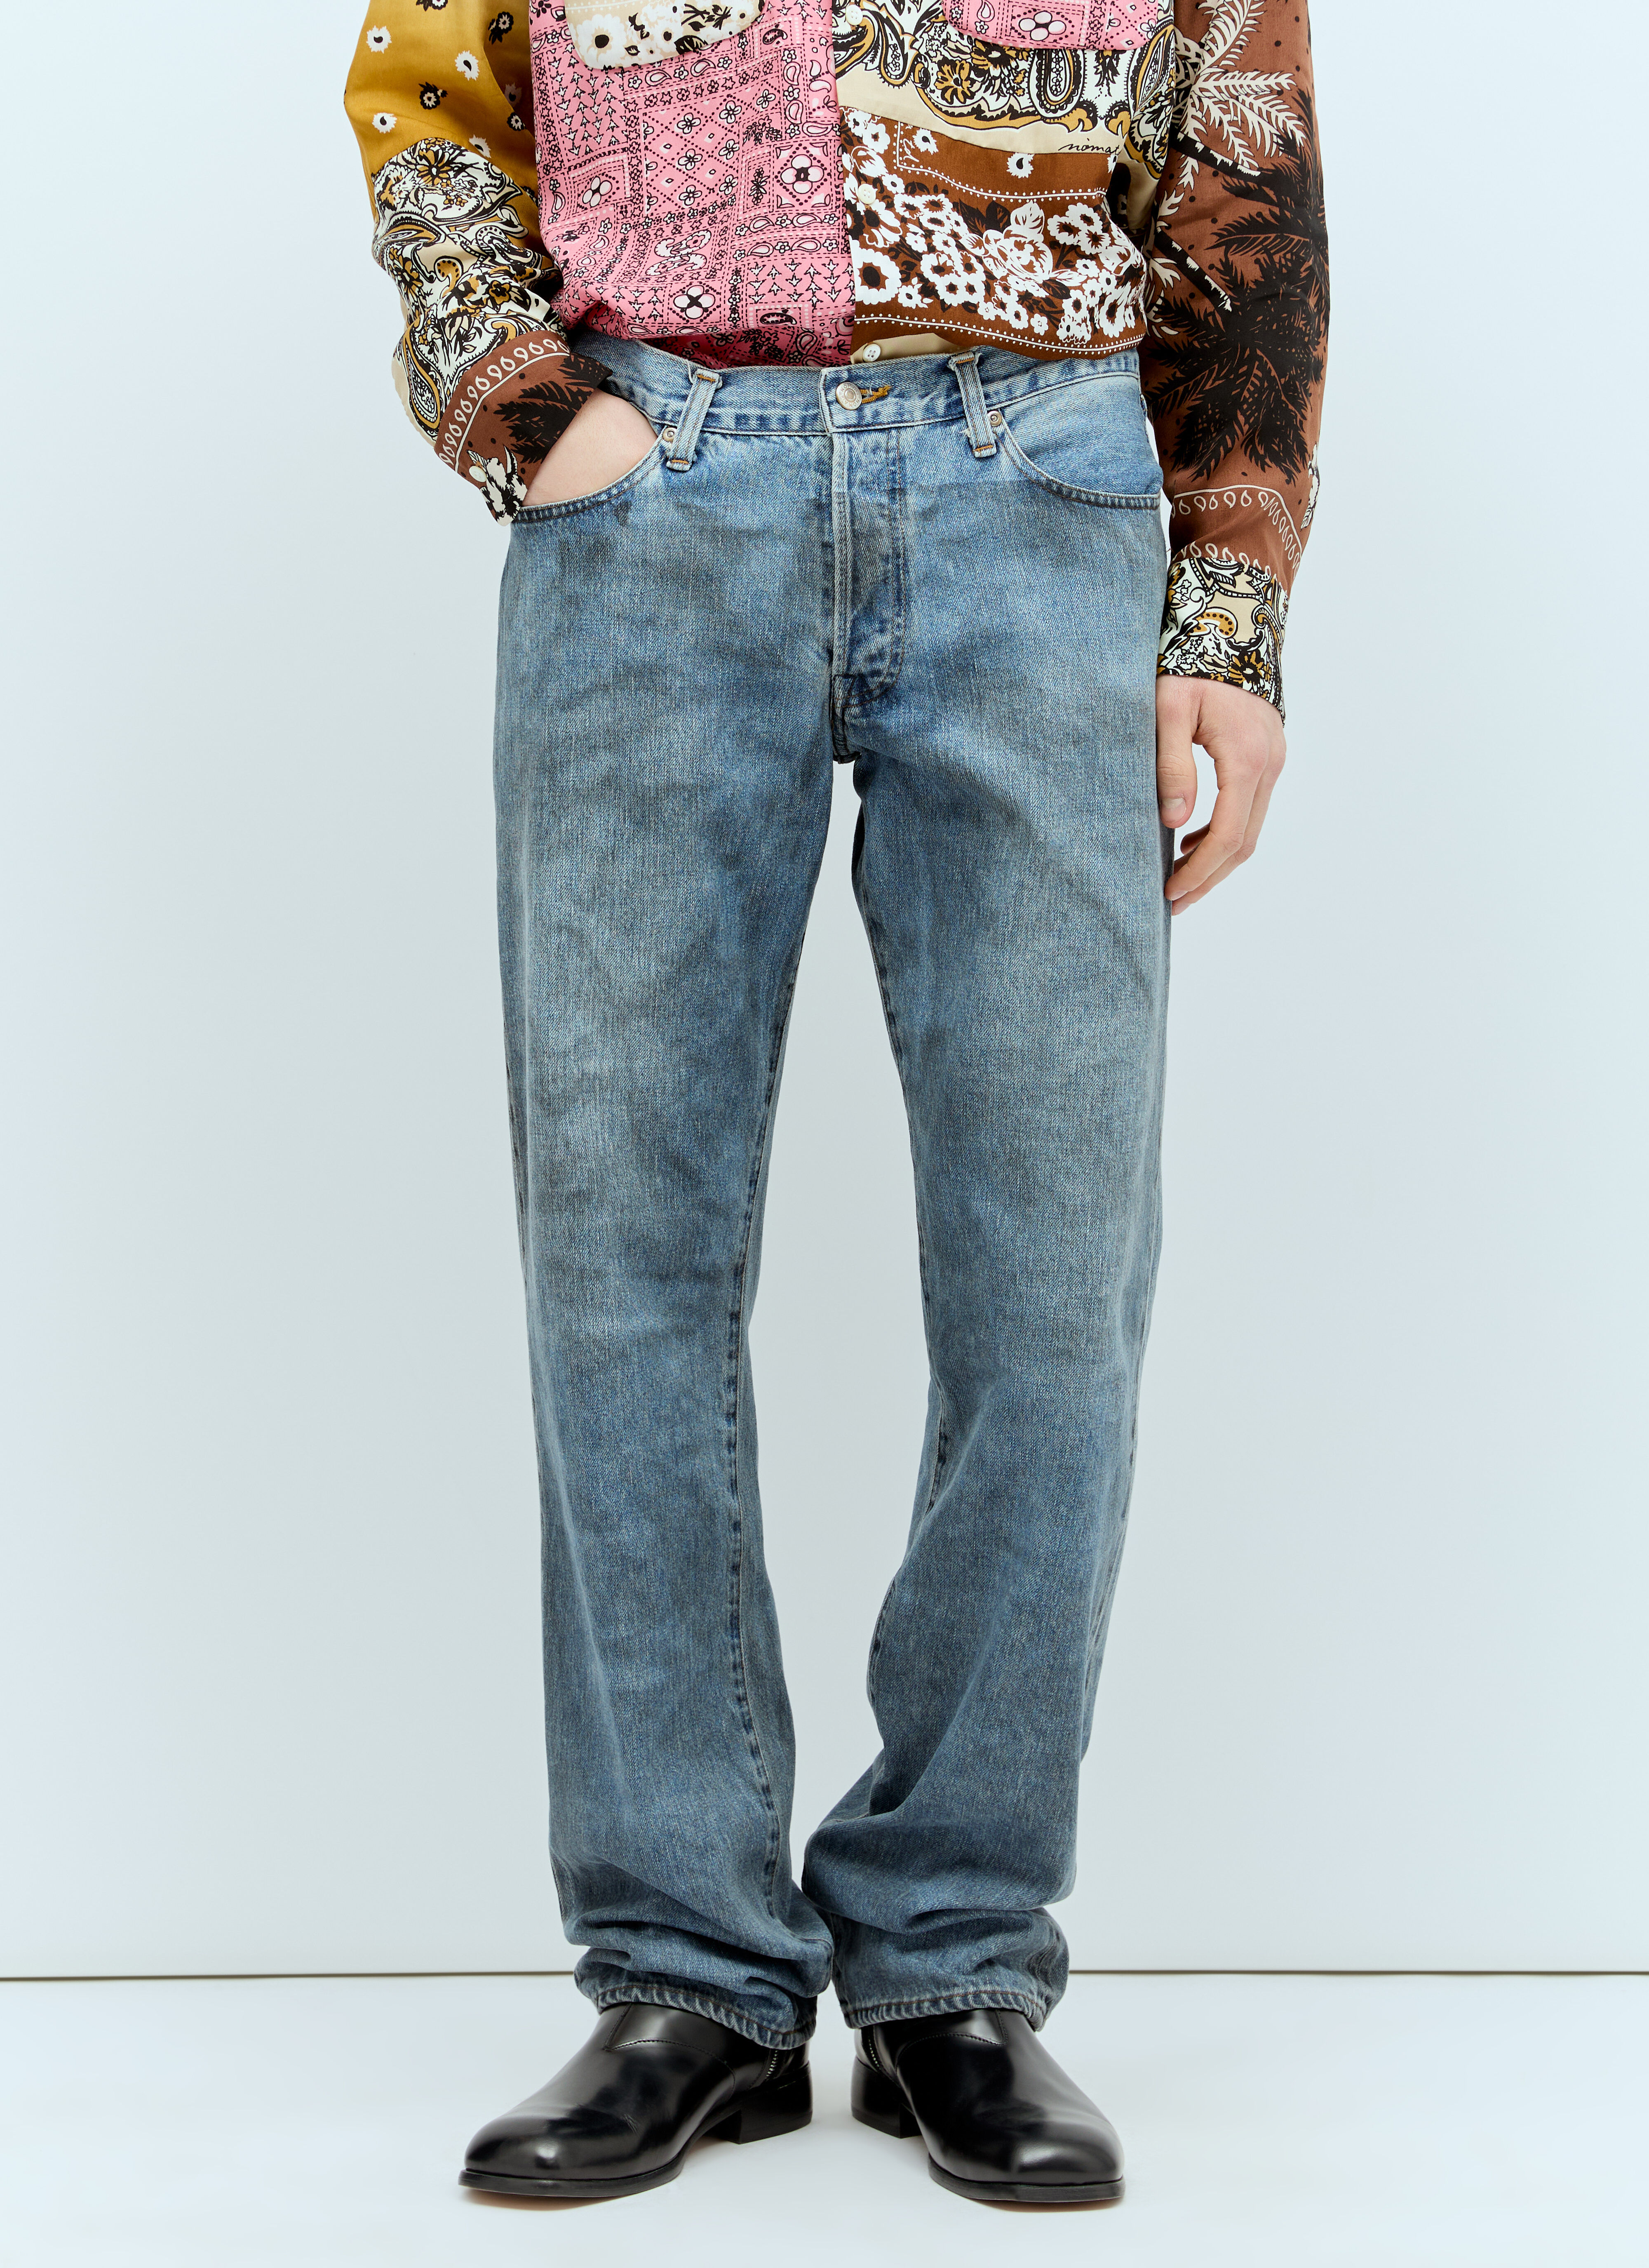 NOMA t.d. Hand-Painted Finish Jeans Multicolour nma0156002